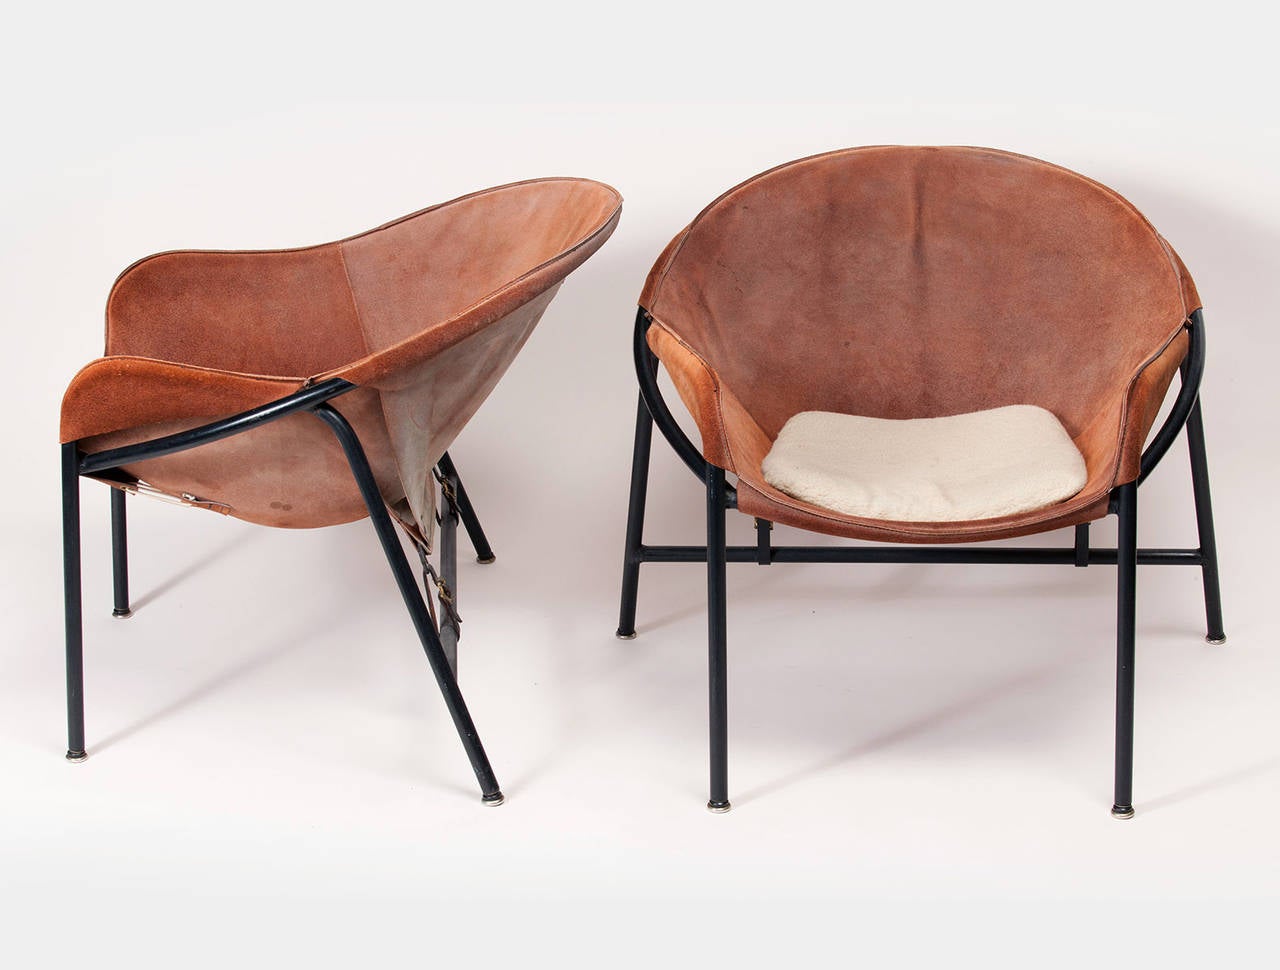 These suede and sheepskin easy chairs were designed by Erik Ole Jørgensen for Bovirke, Denmark. Painted metal bases with belted backs and loose cushions.